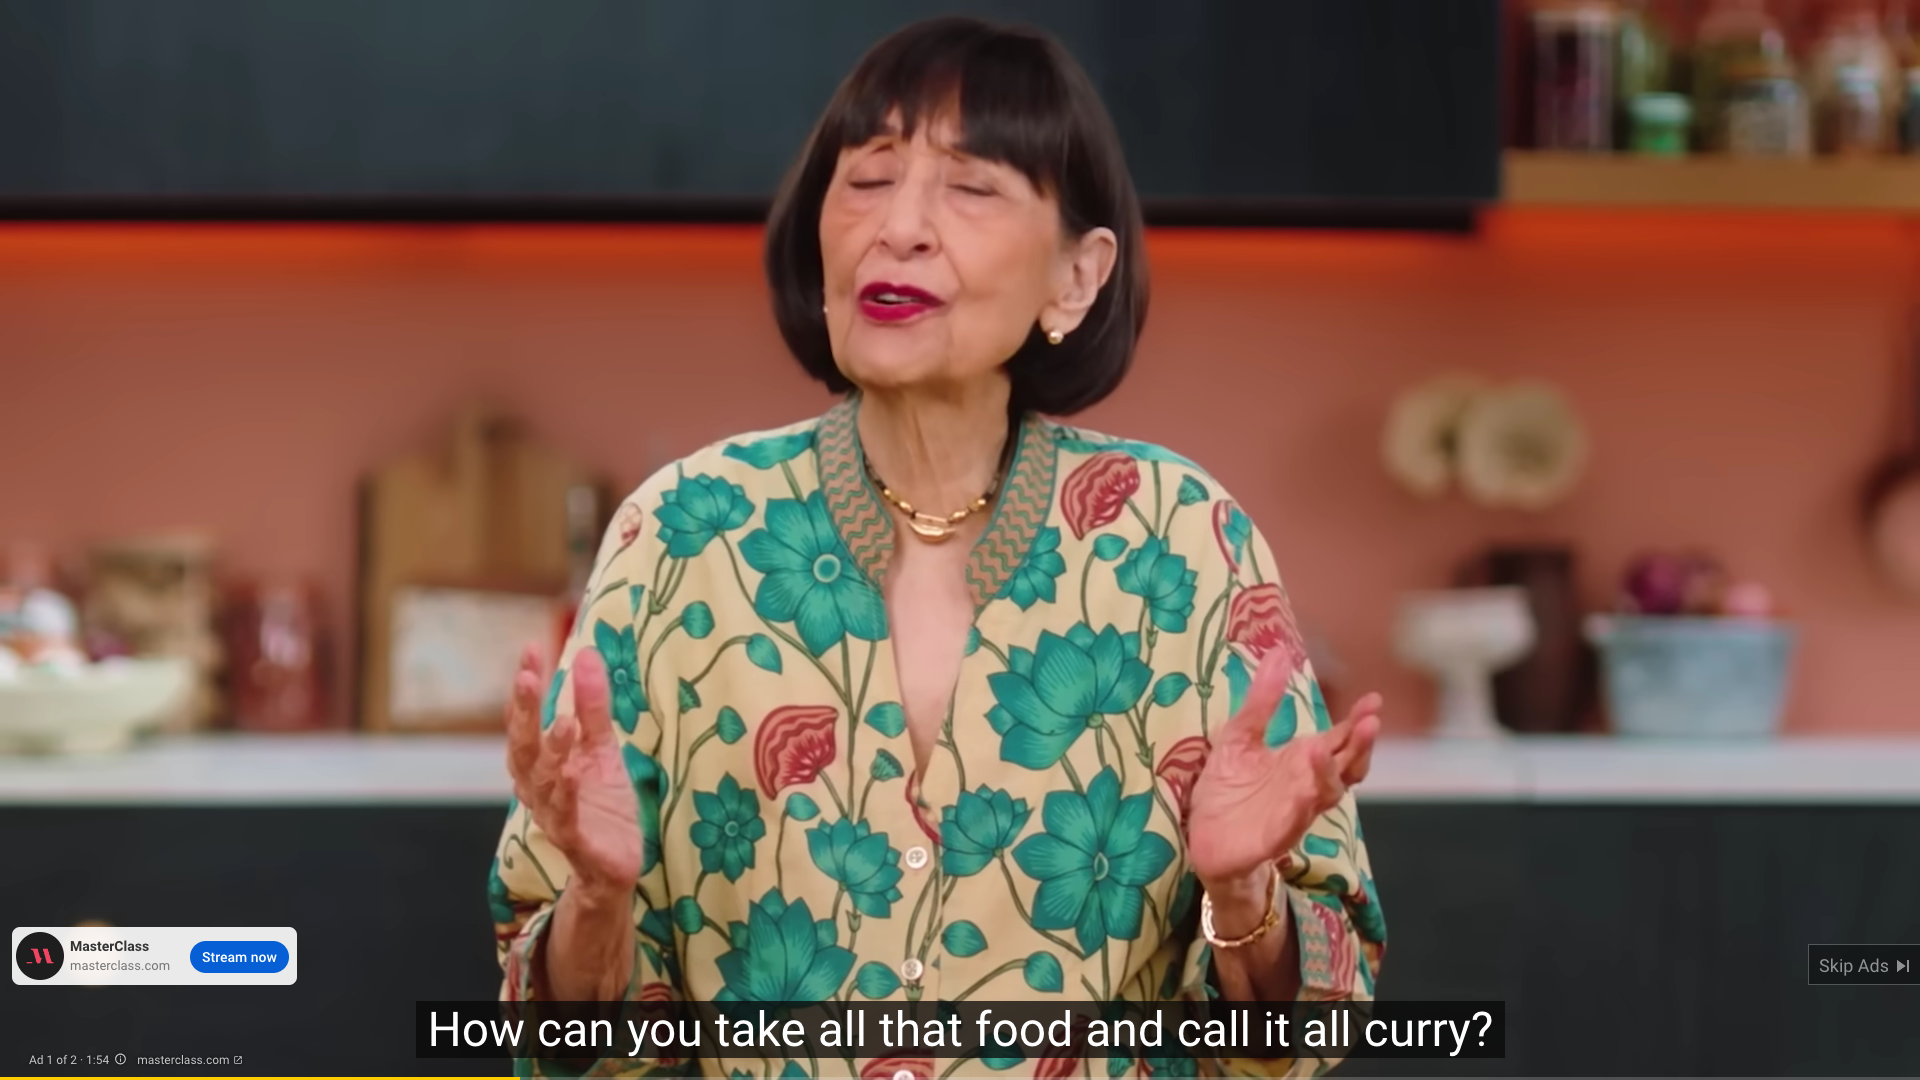 Youtube ad screenshot of Madhur Jaffrey talking to camera about Indian food. The audio caption reads 'How can you take all that food and call it all curry?'.